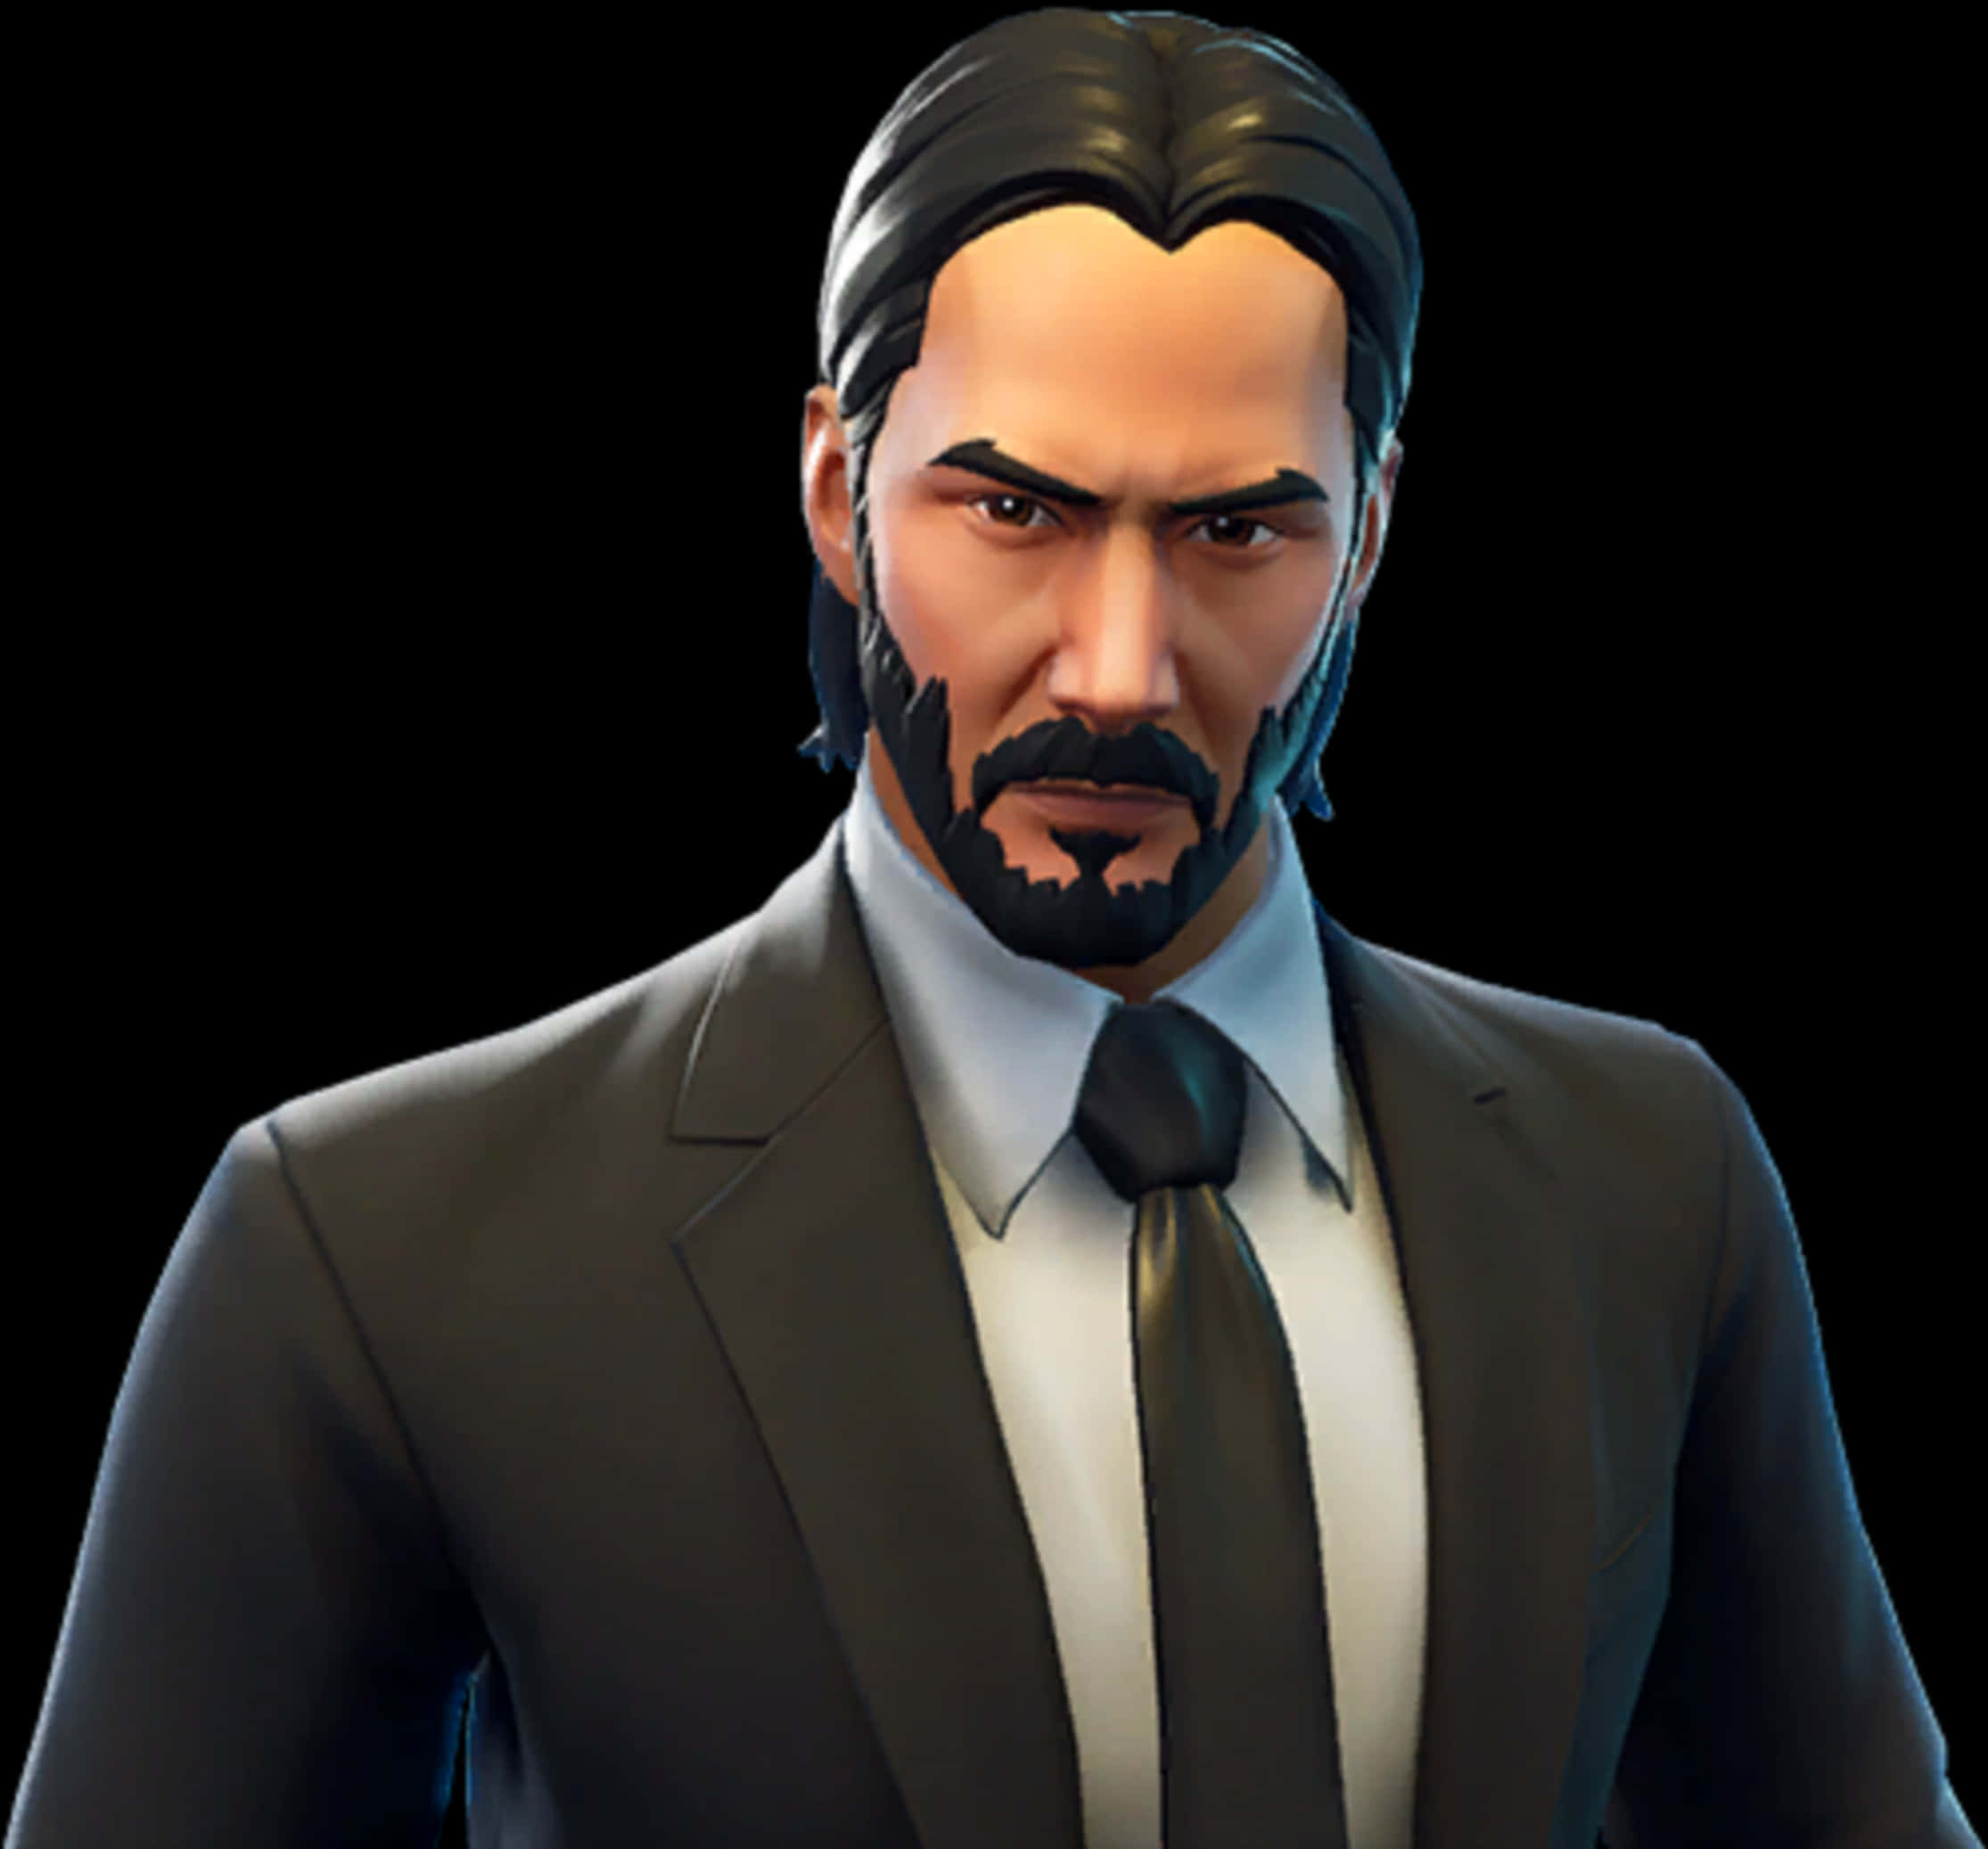 Fortnite Suited Character Portrait PNG image